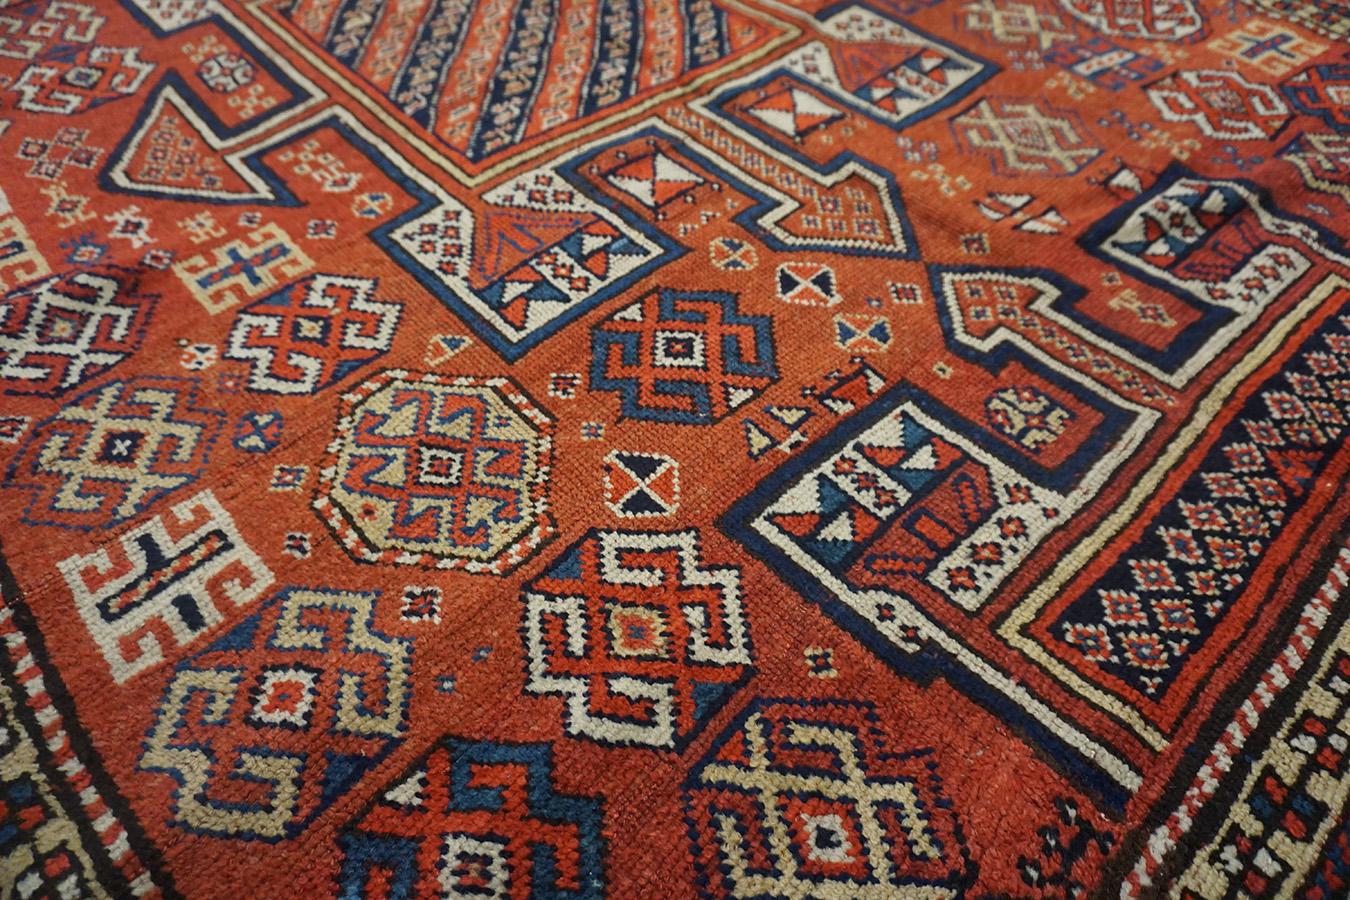 Late 19th Century Antique Persian Quchan Tribal Rug 5'6